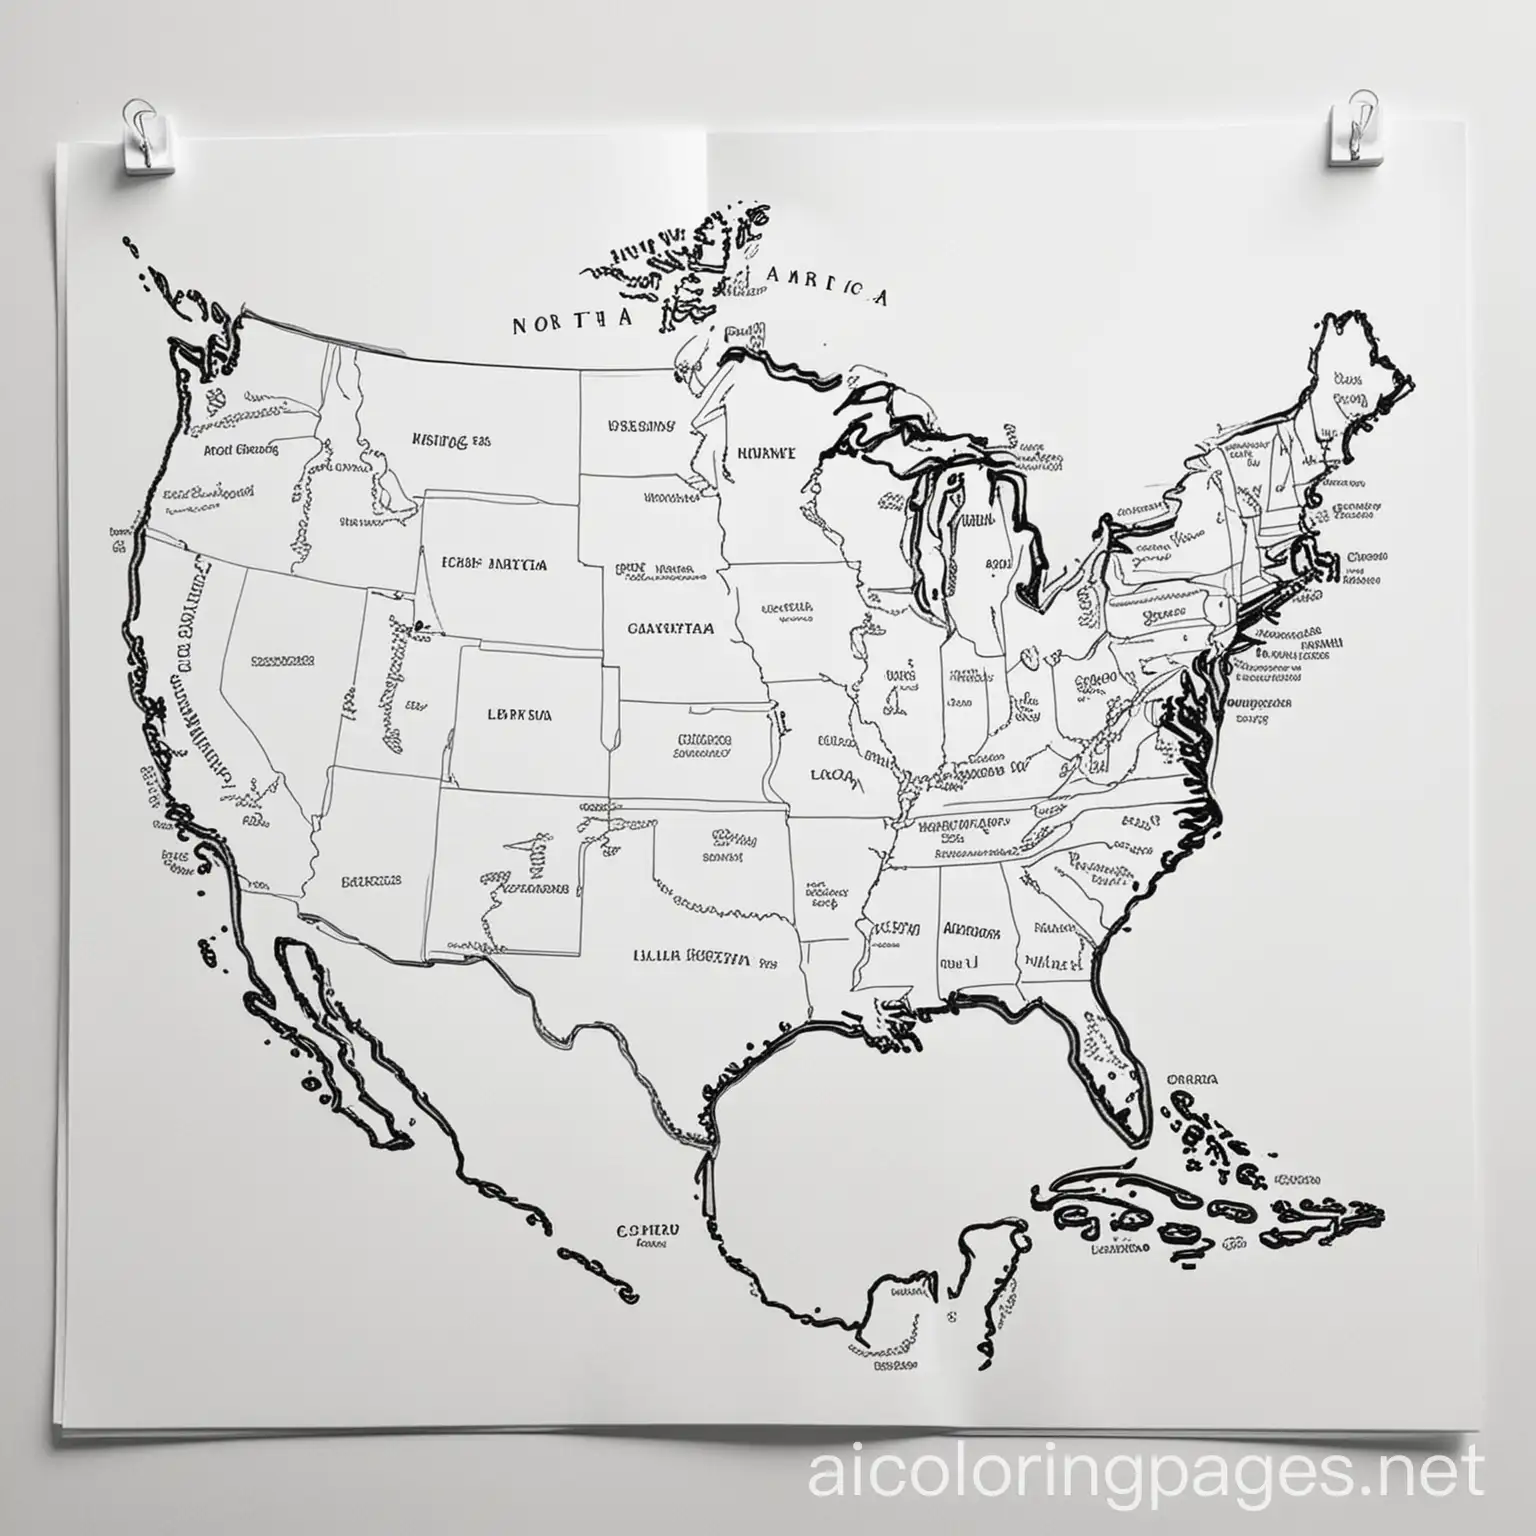 Simple-North-America-Map-with-10-Landmarks-Coloring-Page-for-Kids